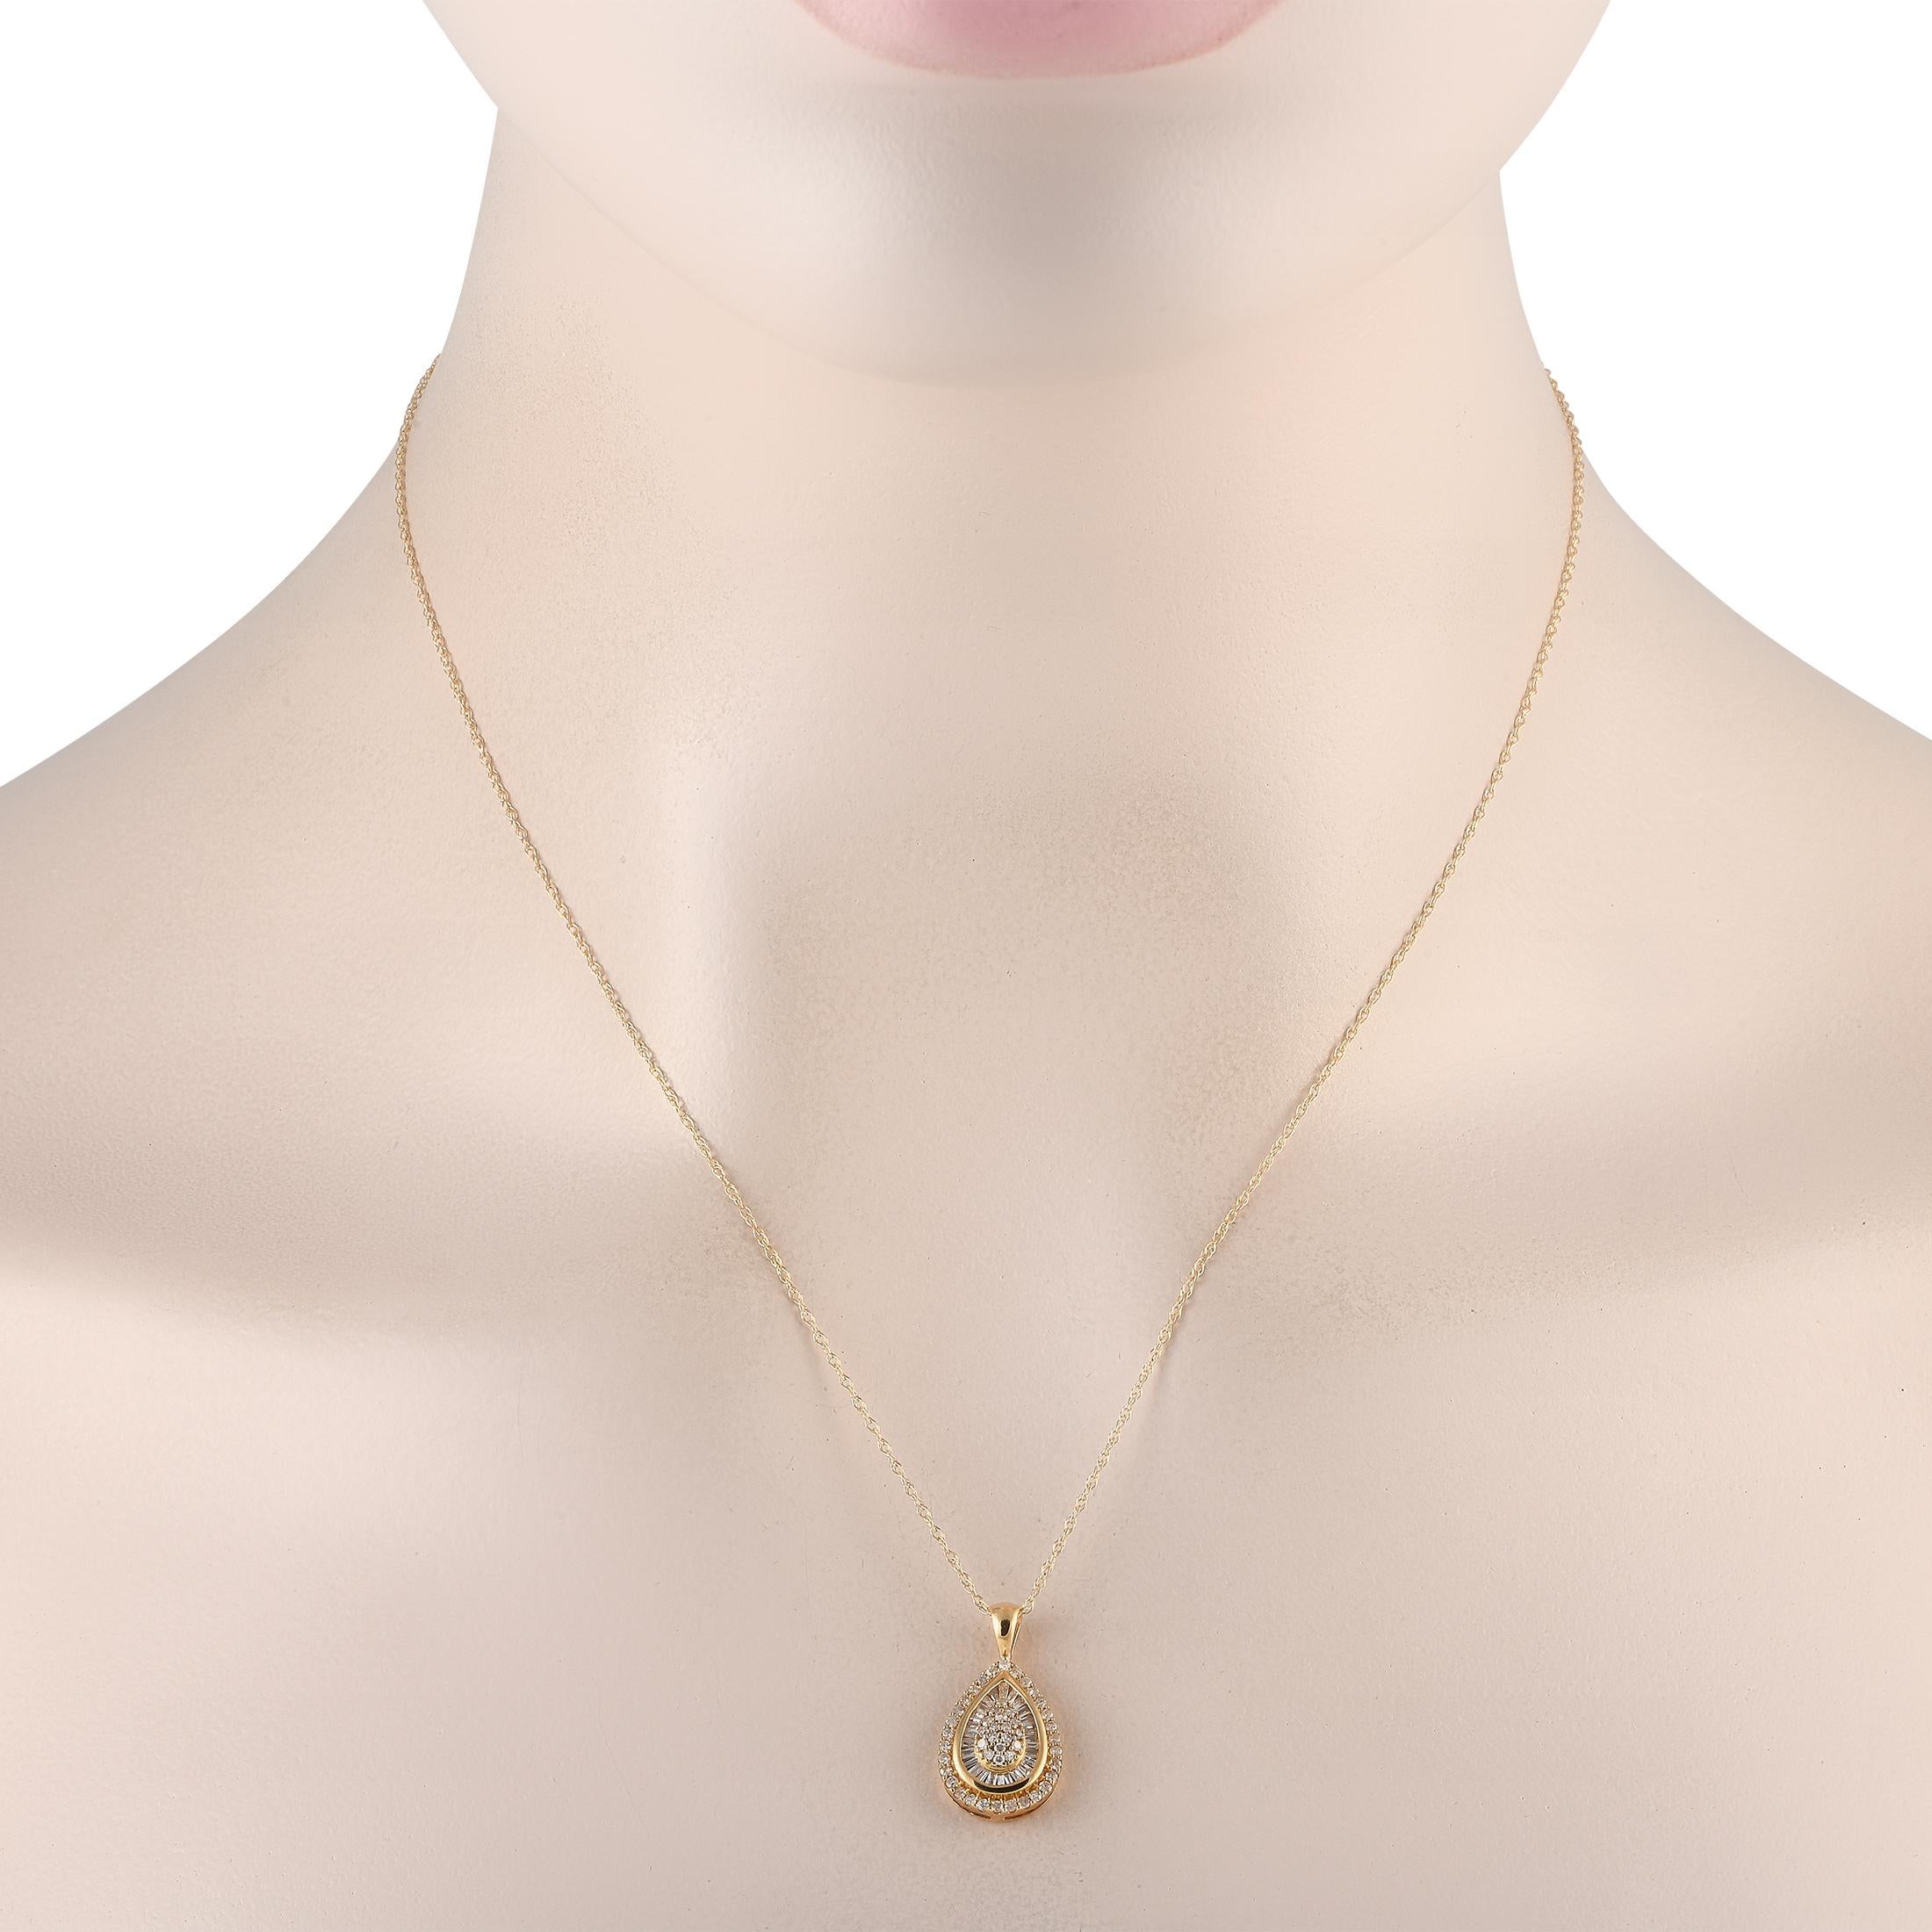 This opulent 14K Yellow Gold necklace will instantly elevate any outfit. Suspended from an 18 chain, a pear-shaped pendant measuring 0.75 long by 0.50 wide serves as a stunning focal point. Diamonds with a total weight of 0.50 carats ensure it